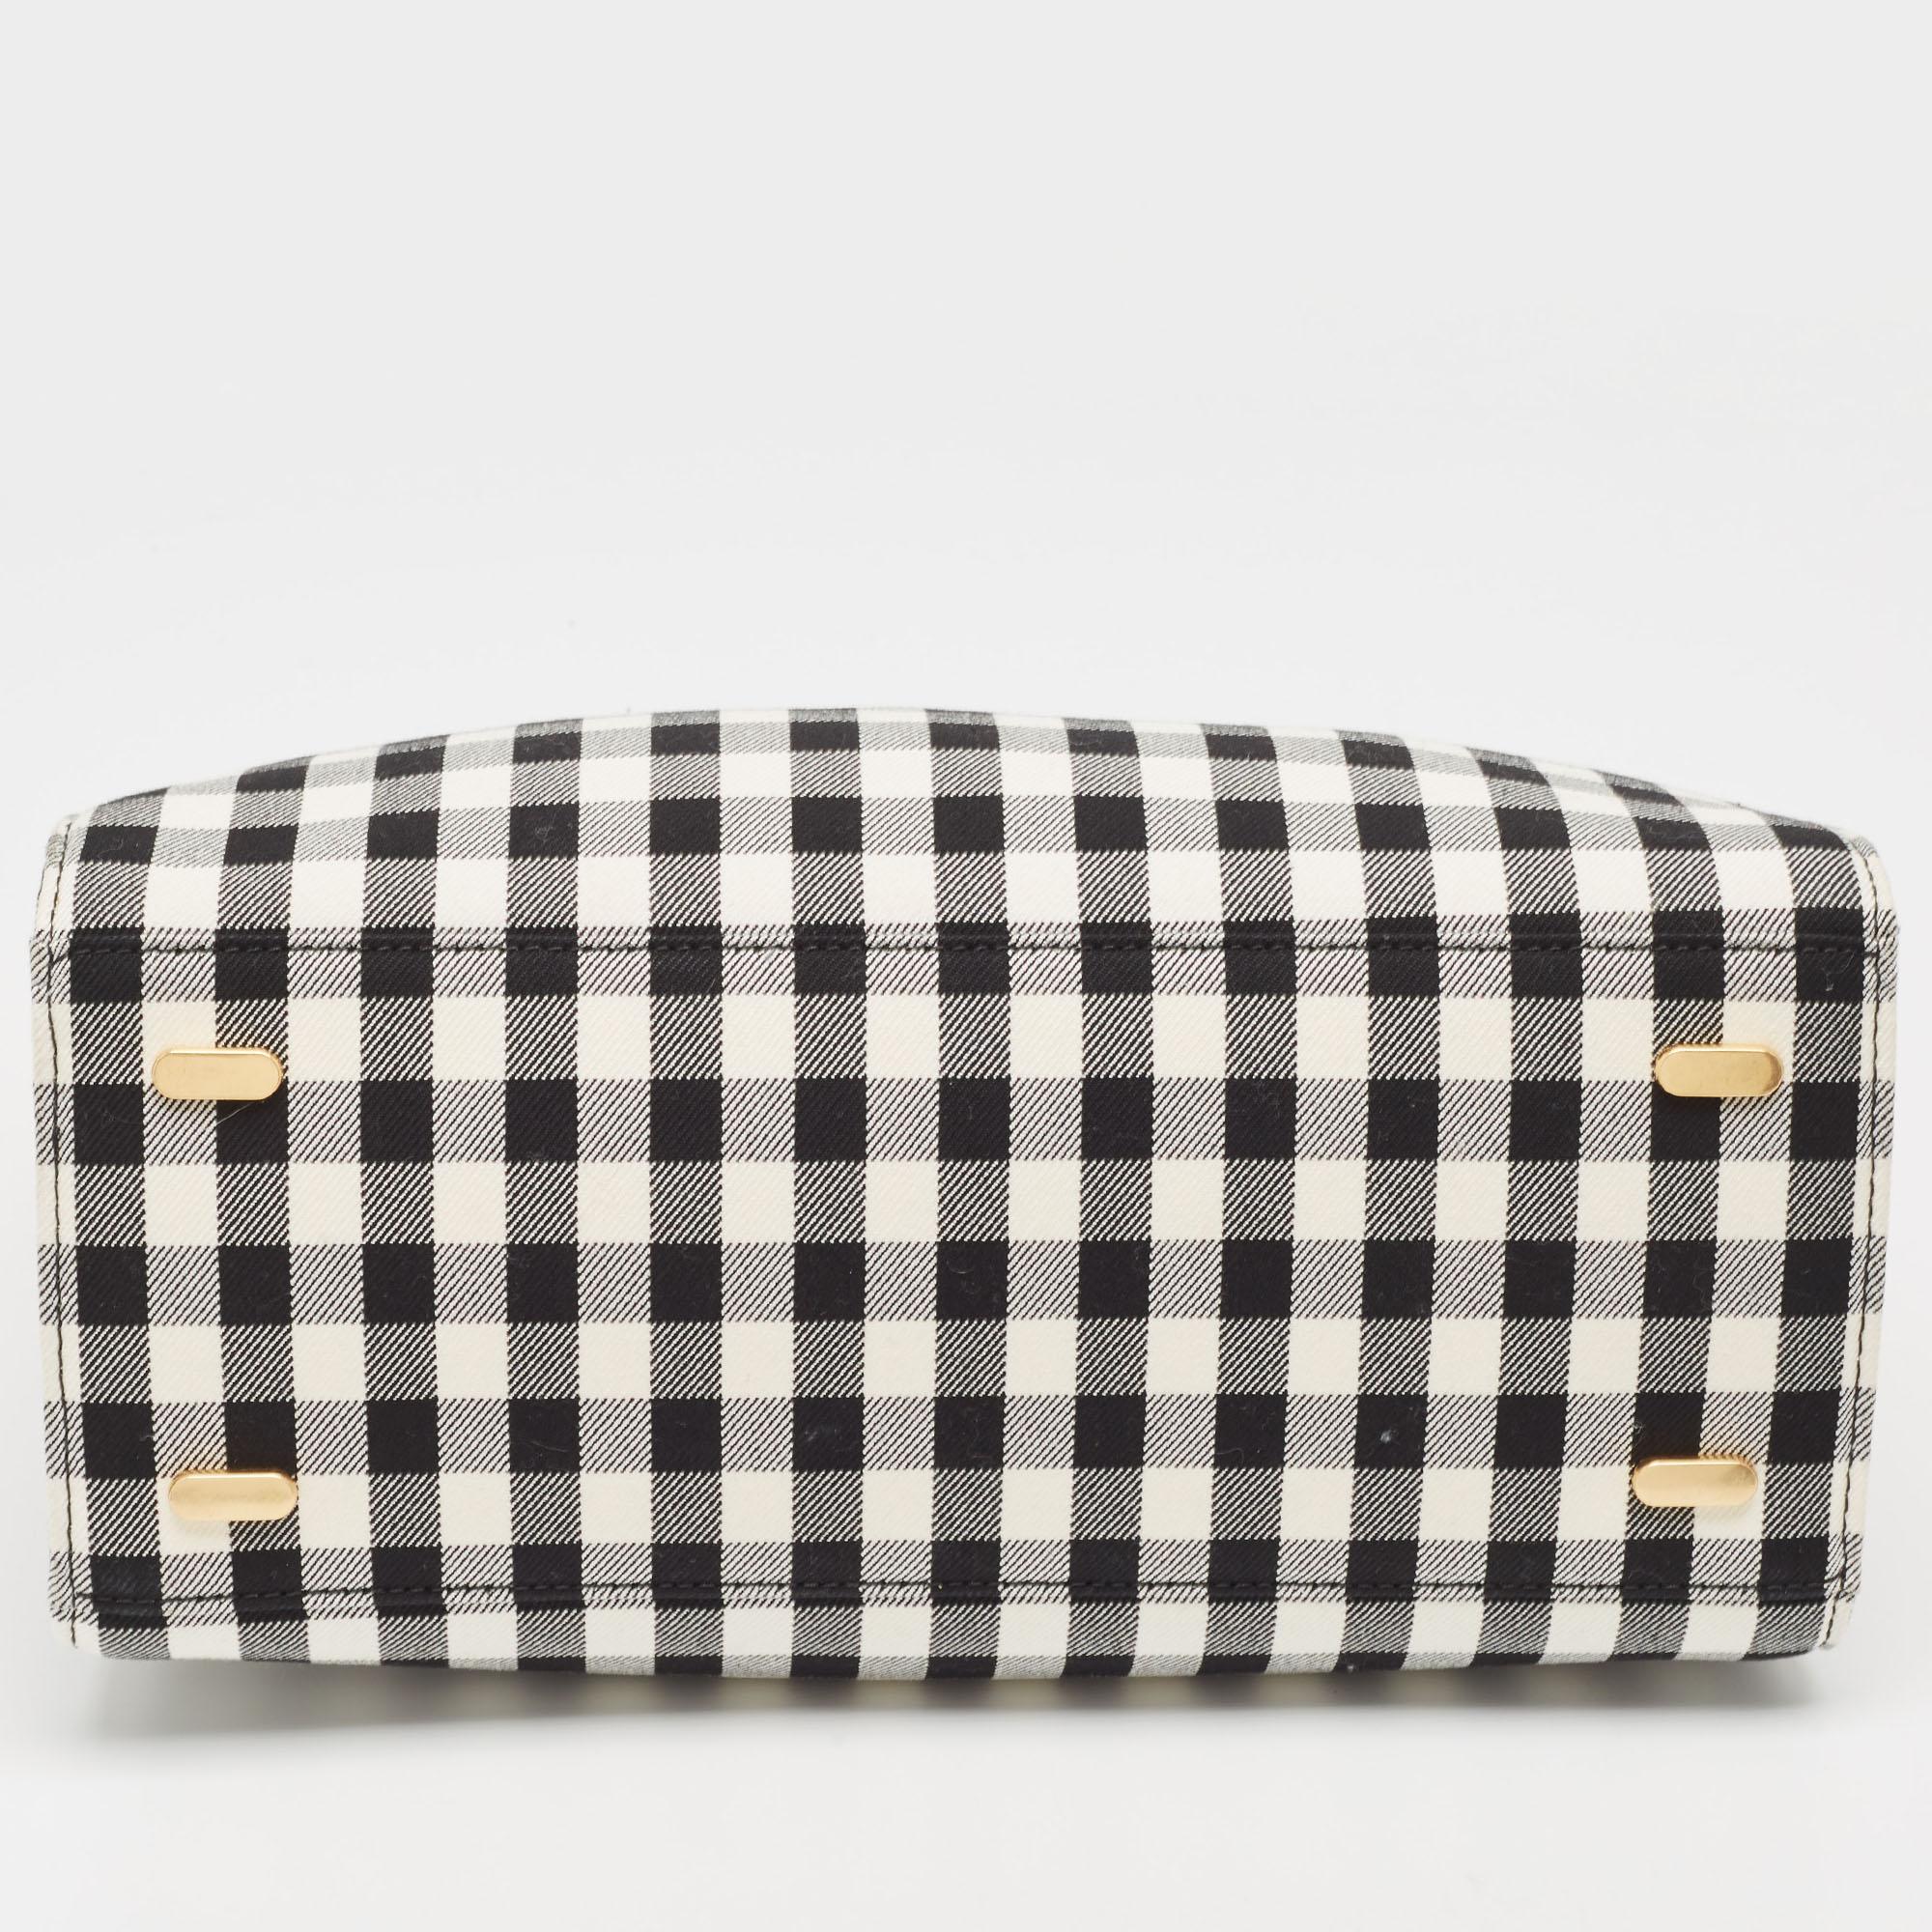 Tory Burch Black/White Checkered Canvas Lee Radziwill Top Handle Bag For Sale 6